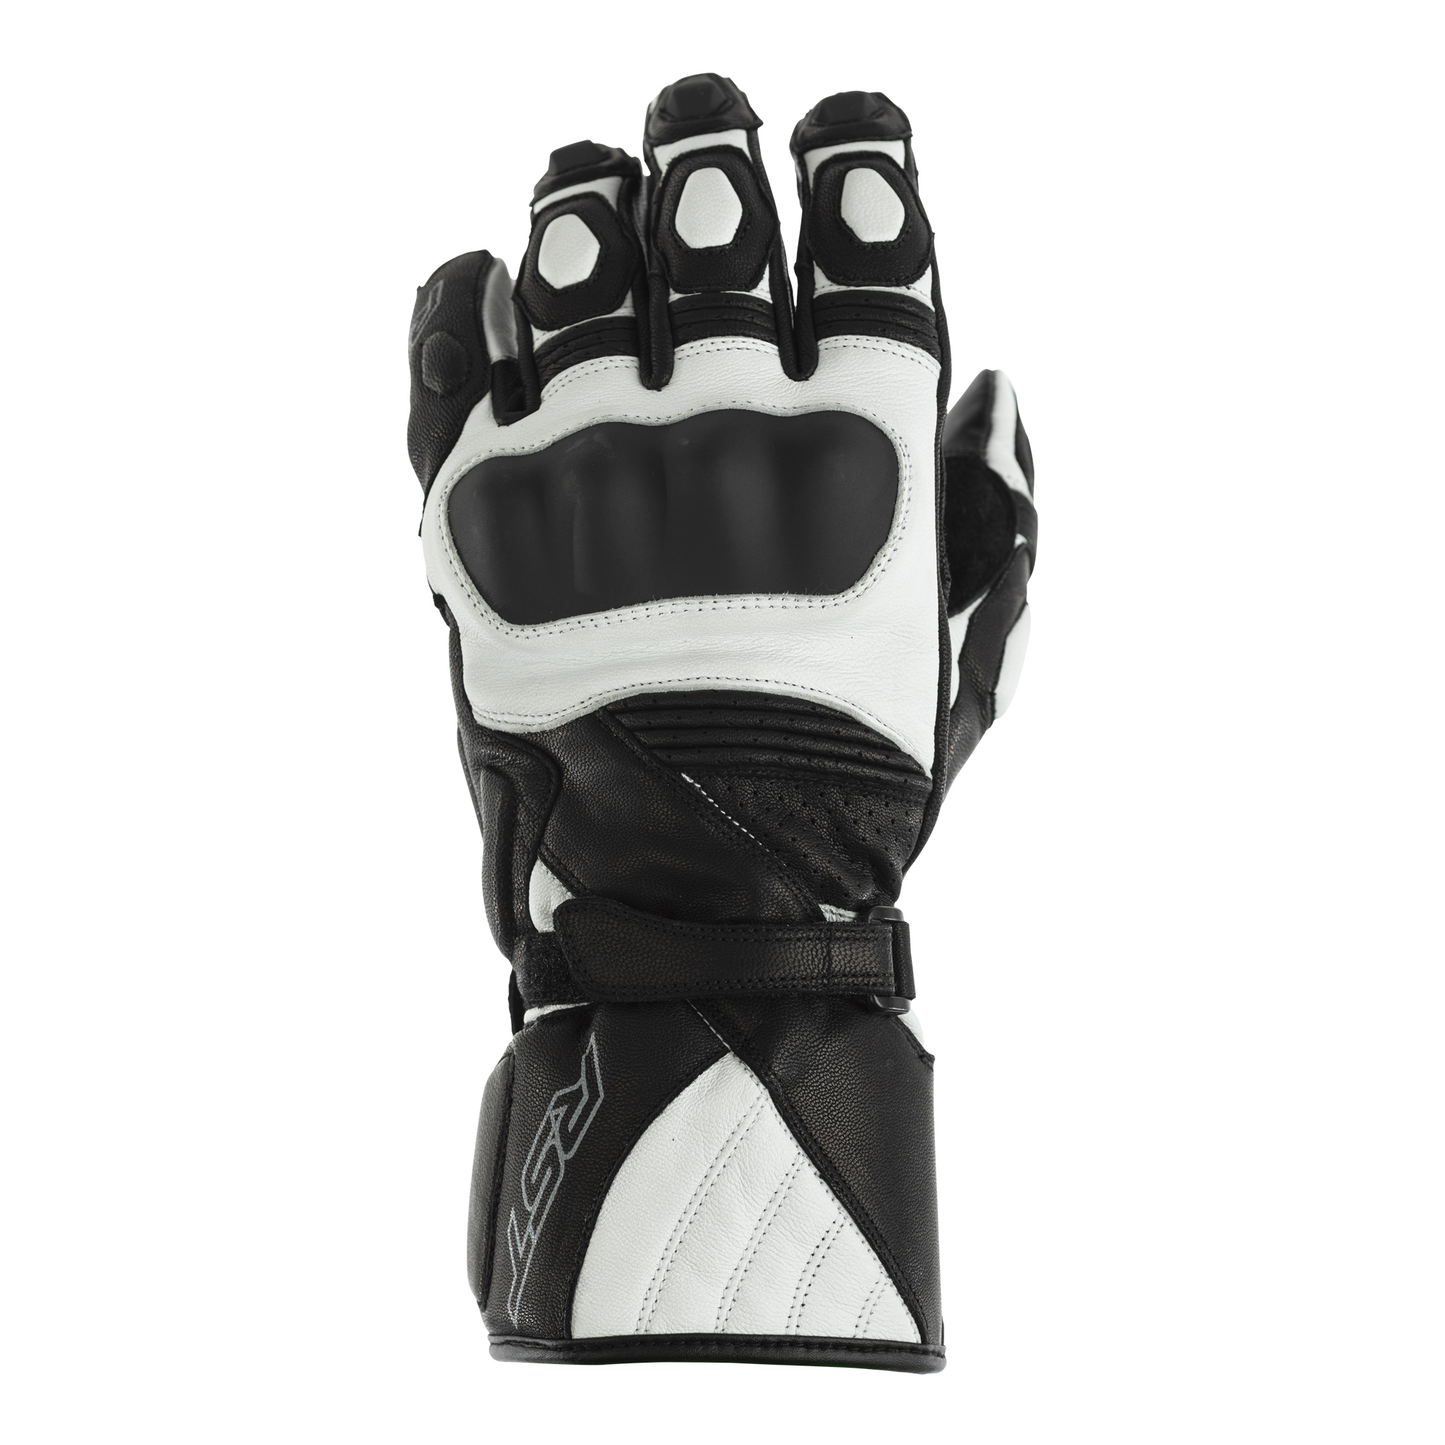 RST GT Leather Racing/Riding Gloves - CE Approved - White